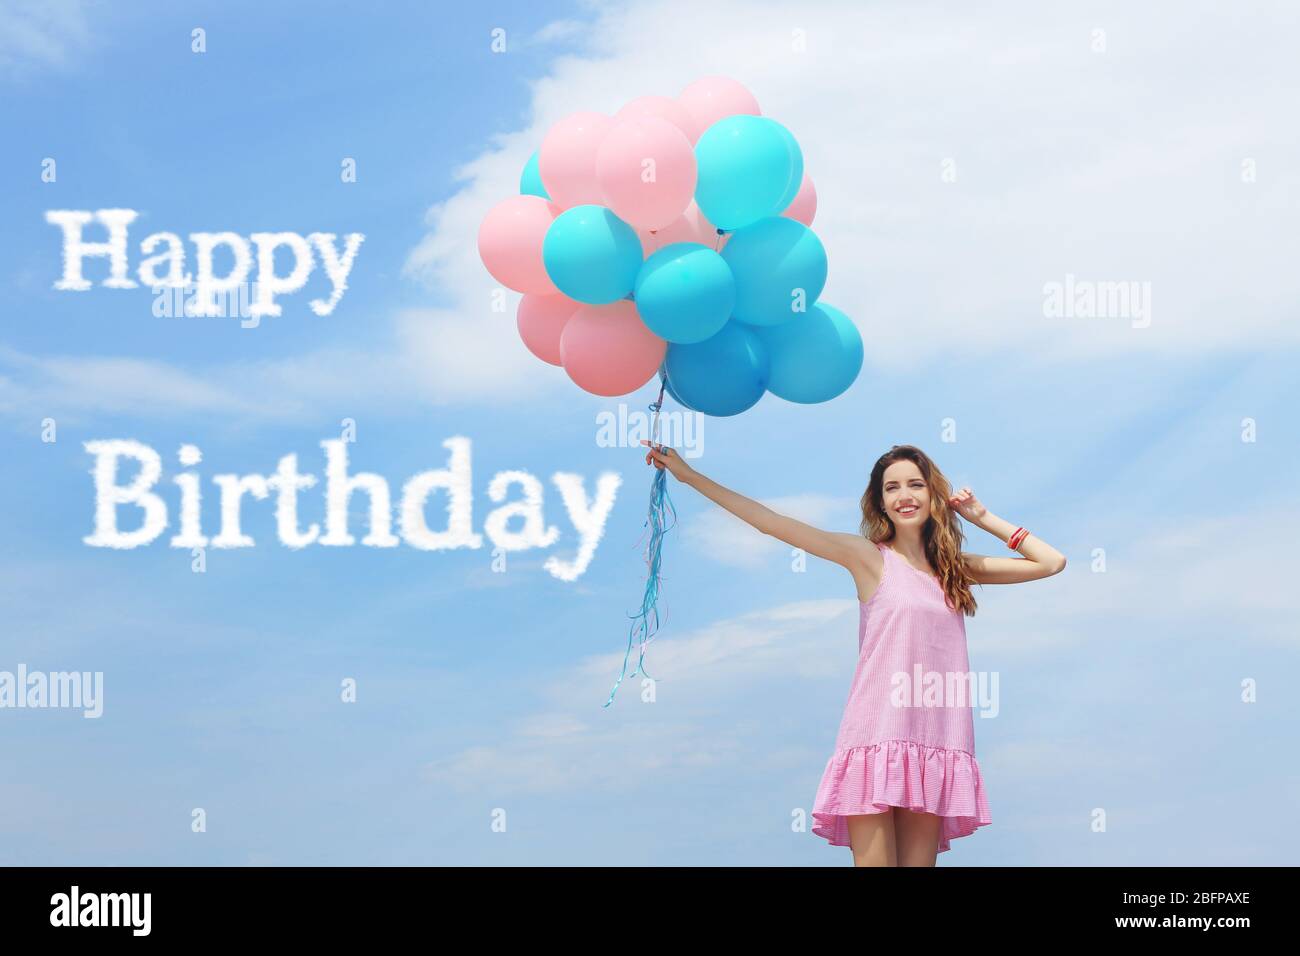 Happy Birthday text and beautiful young woman with colorful balloons  against blue sky Stock Photo - Alamy